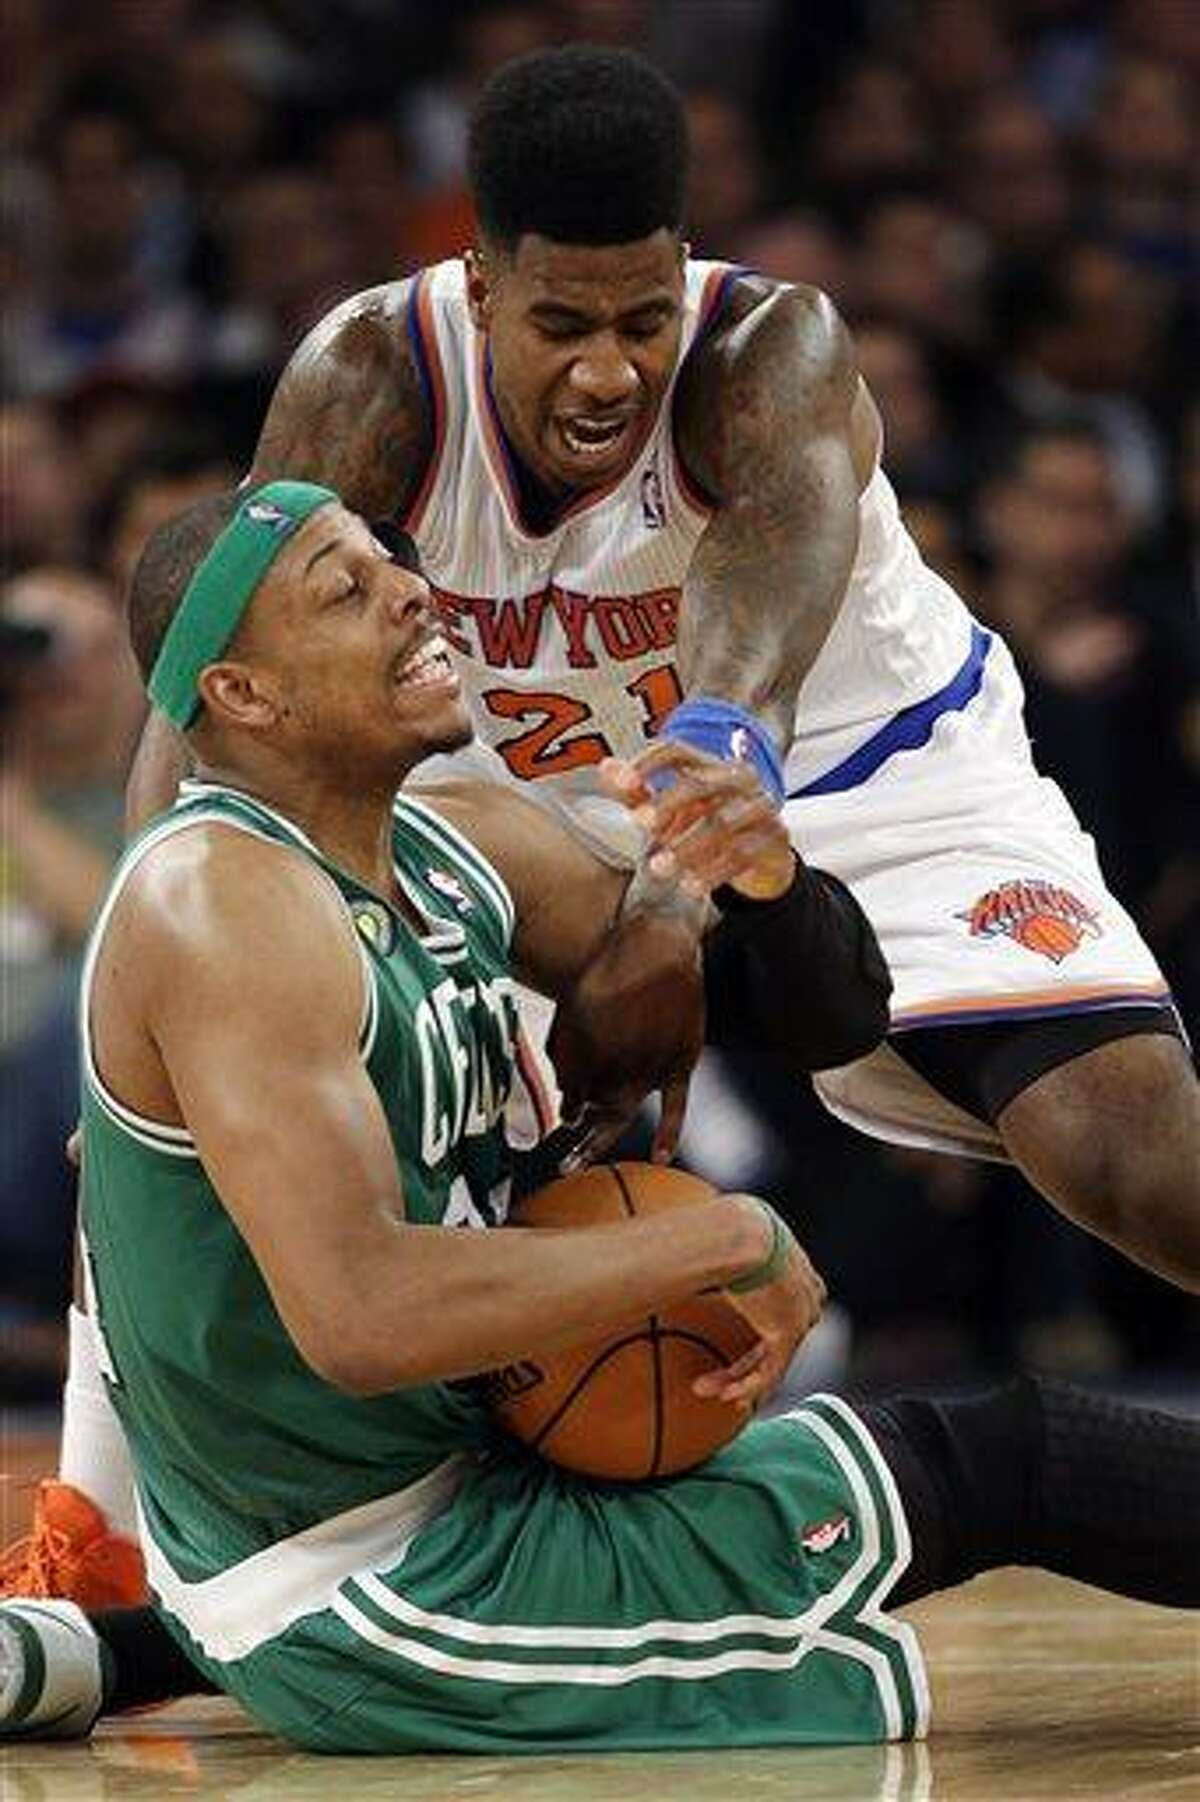 New York Knicks forward Iman Shumpert (21) and Boston Celtics forward Paul Pierce (34) fight for the ball in the first half of Game 5 of their first-round NBA basketball playoff series at Madison Square Garden in New York, Wednesday, May 1, 2013. (AP Photo/Kathy Willens)